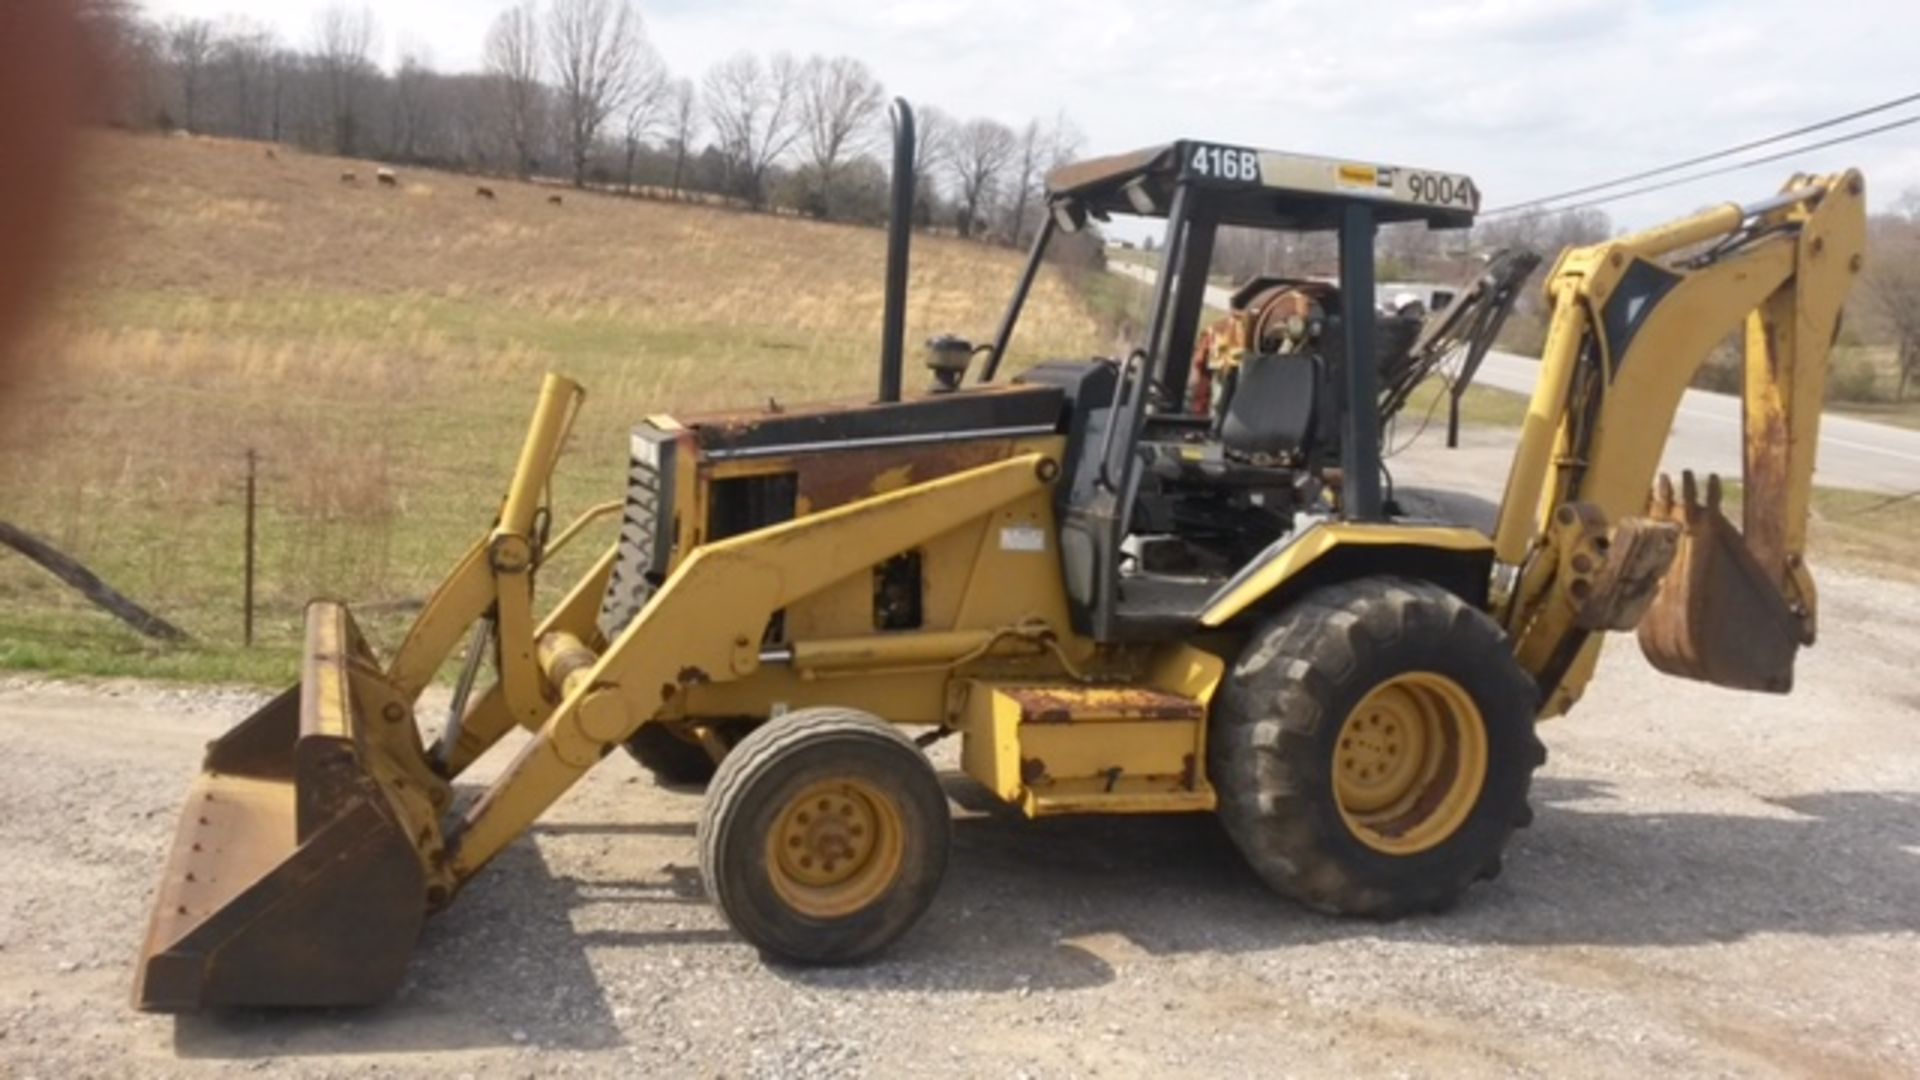 CAT 416B Loader/Backhoe, OROPS, 2WD, New Side covers and Exhaust S/N 85G09004 (Located at 3823